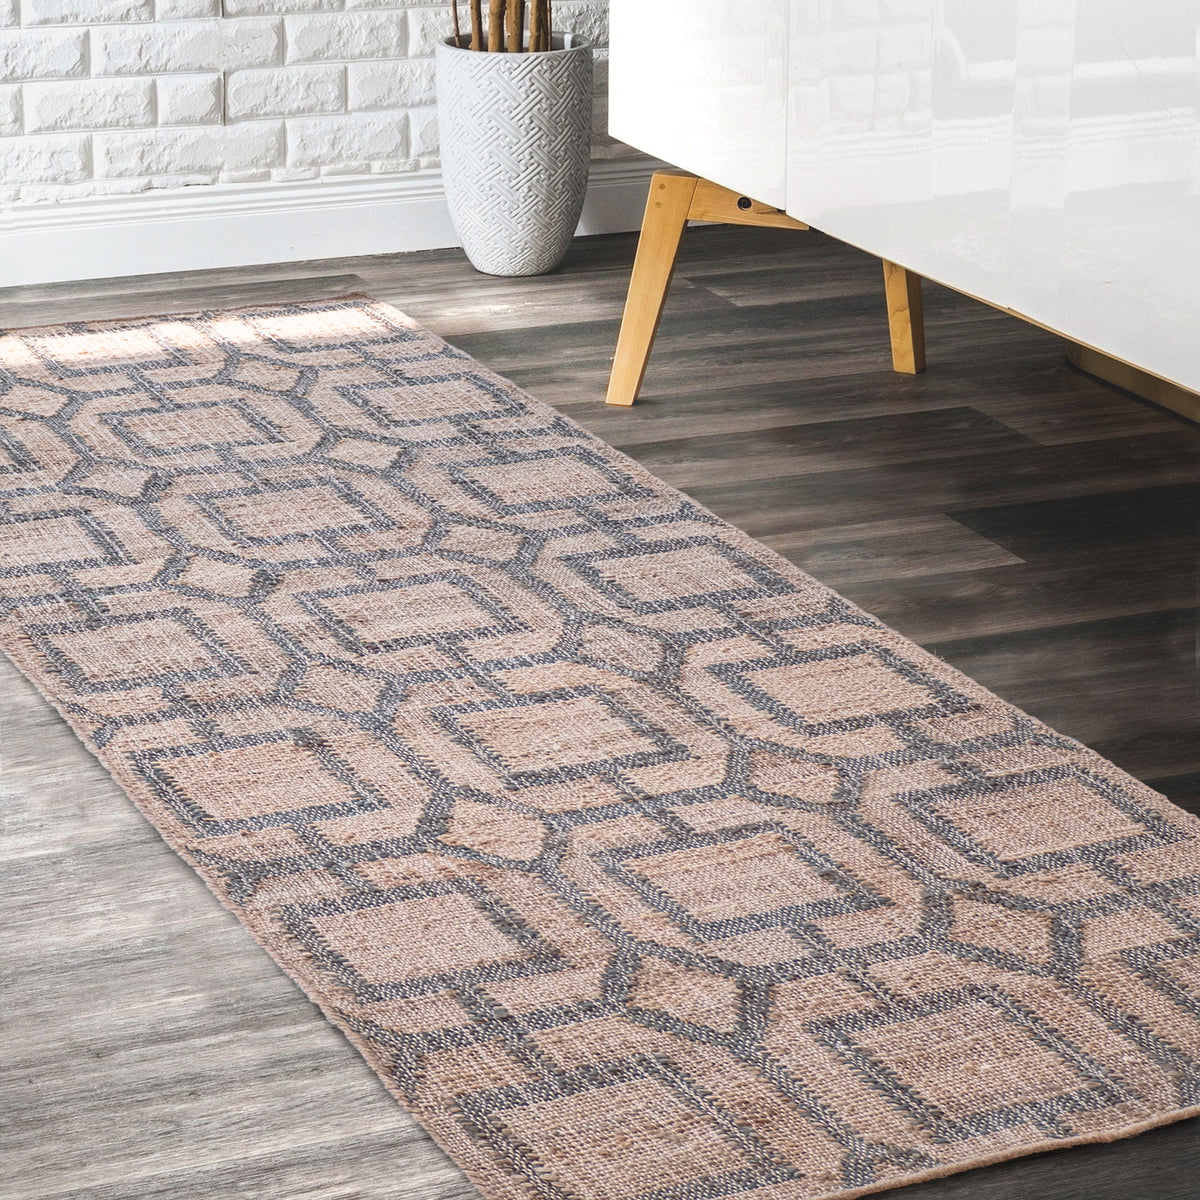 Lifestyle photo. Jute runner shown in an entryway next to a modern white couch against a gray-brown hardwood floor.